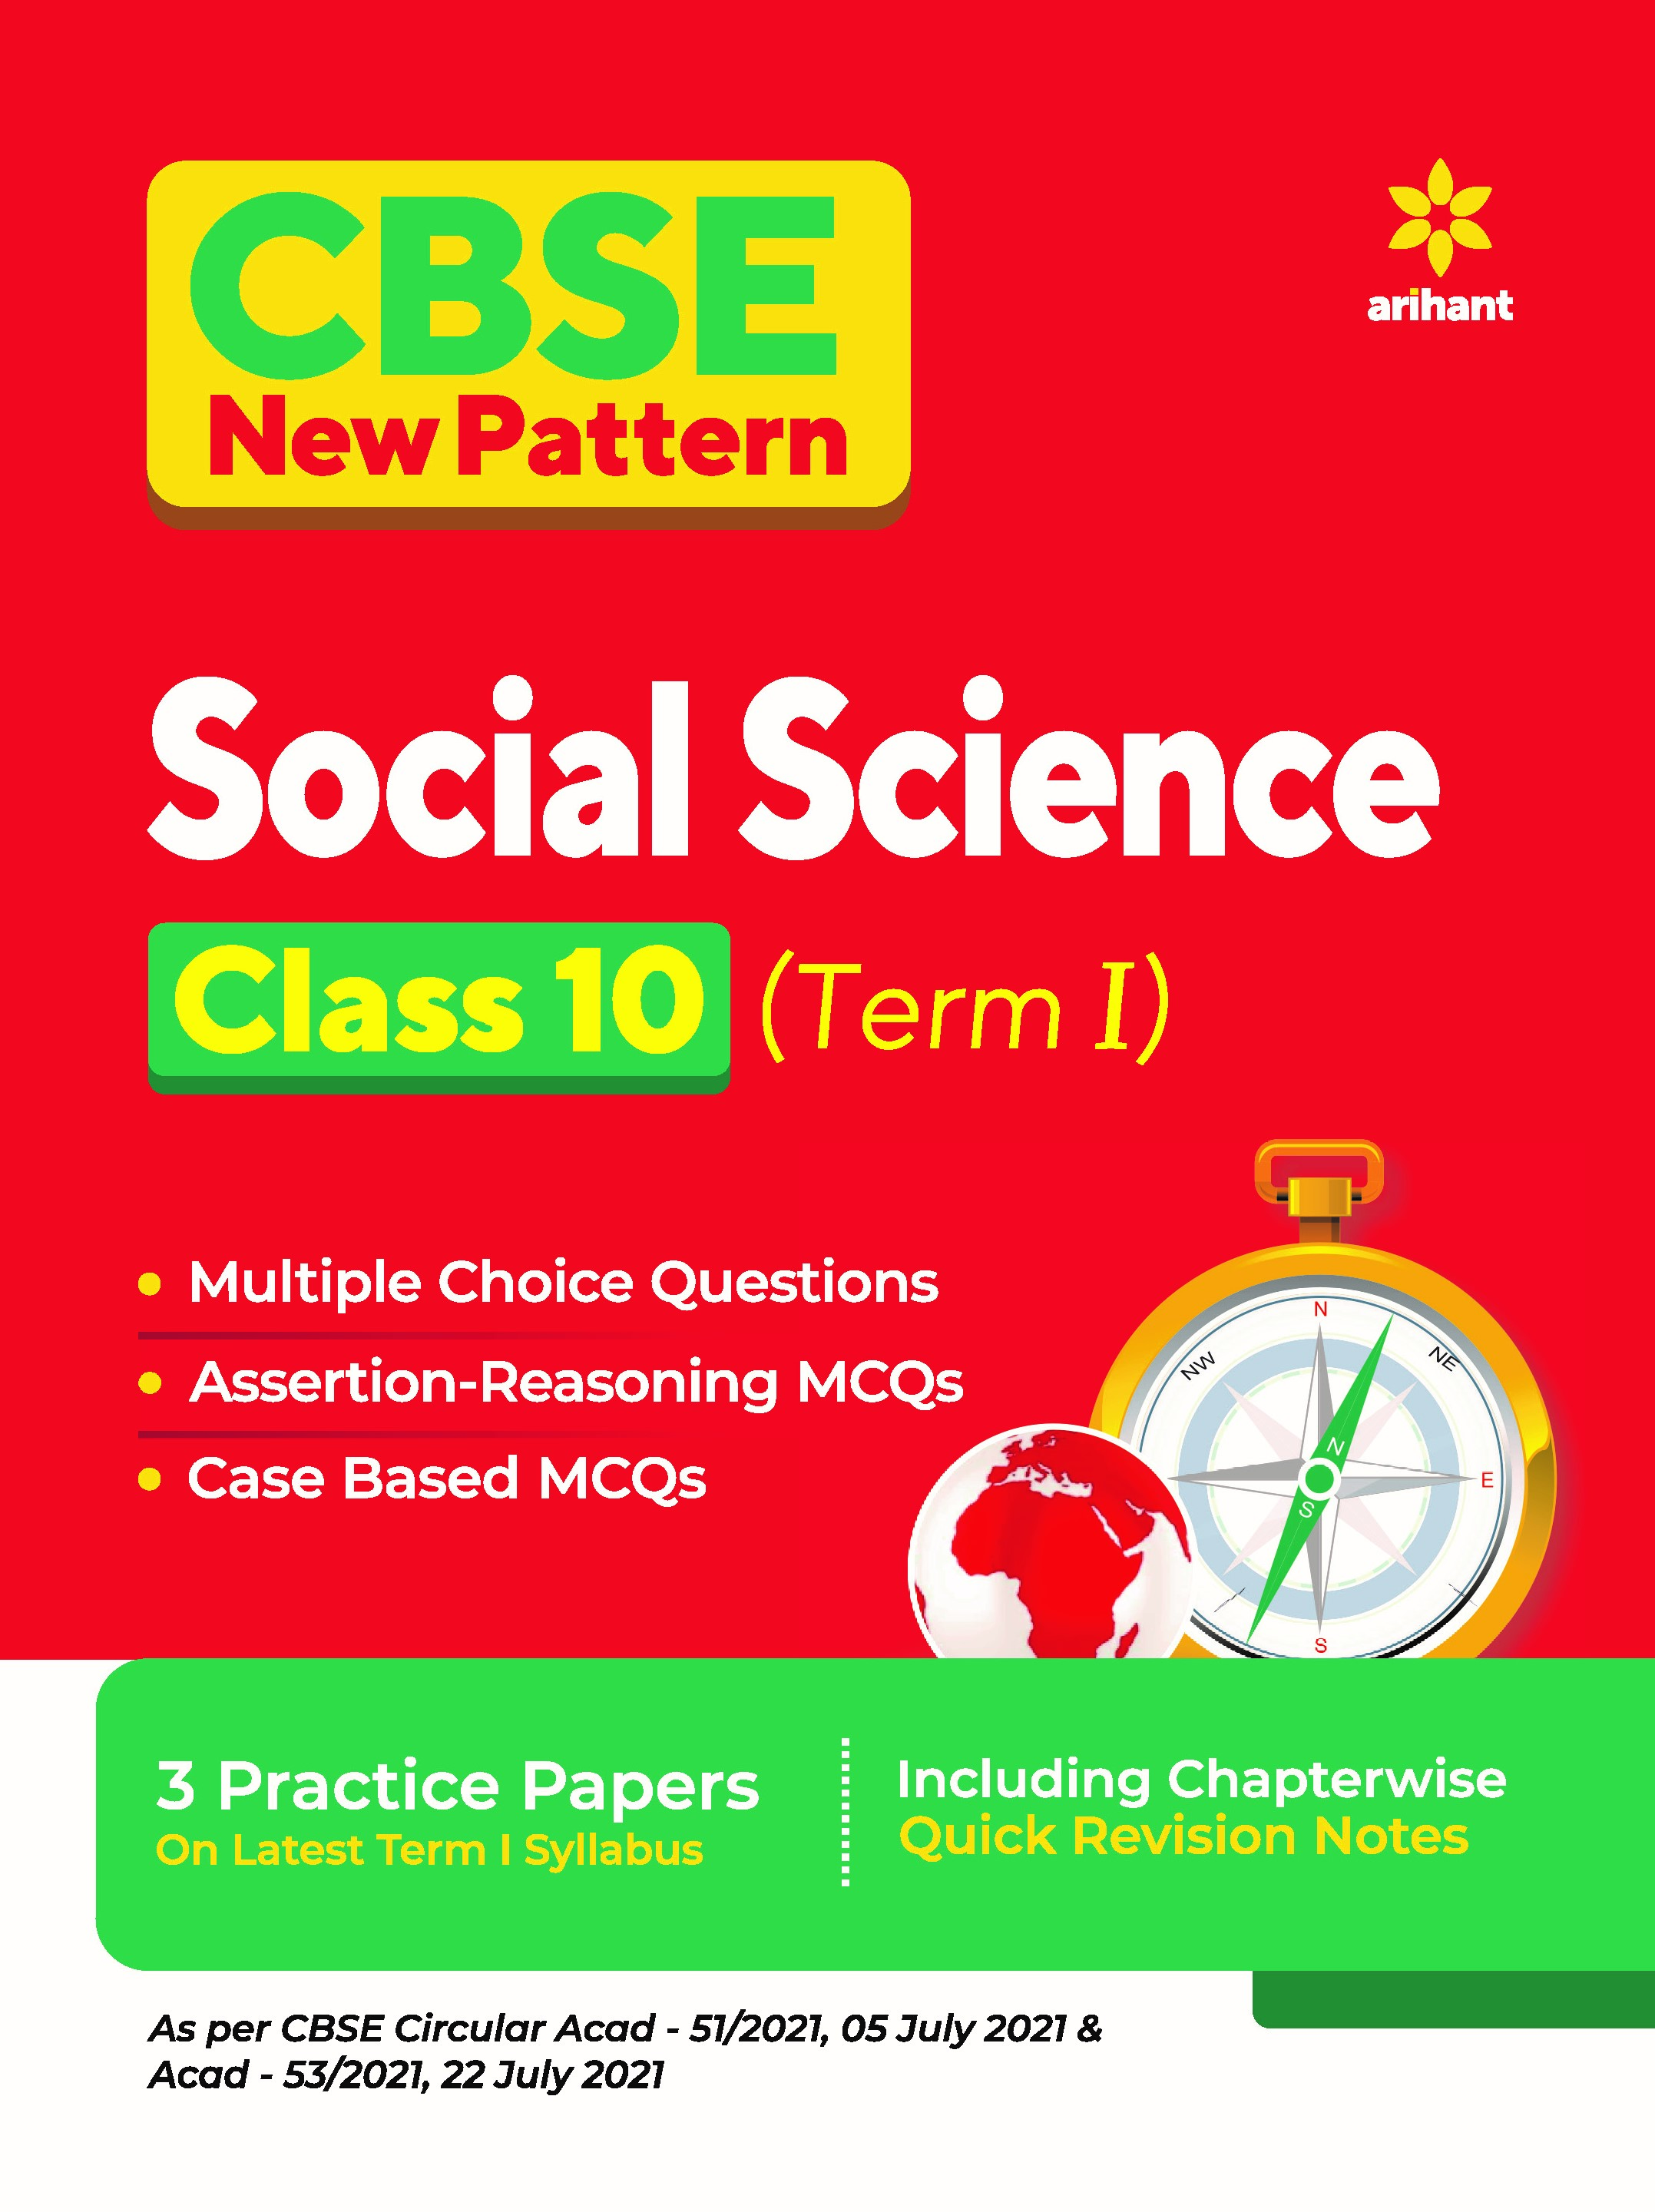 CBSE New Pattern Social Science Class 10 for 2021-22 Exam (MCQs based book for Term 1)